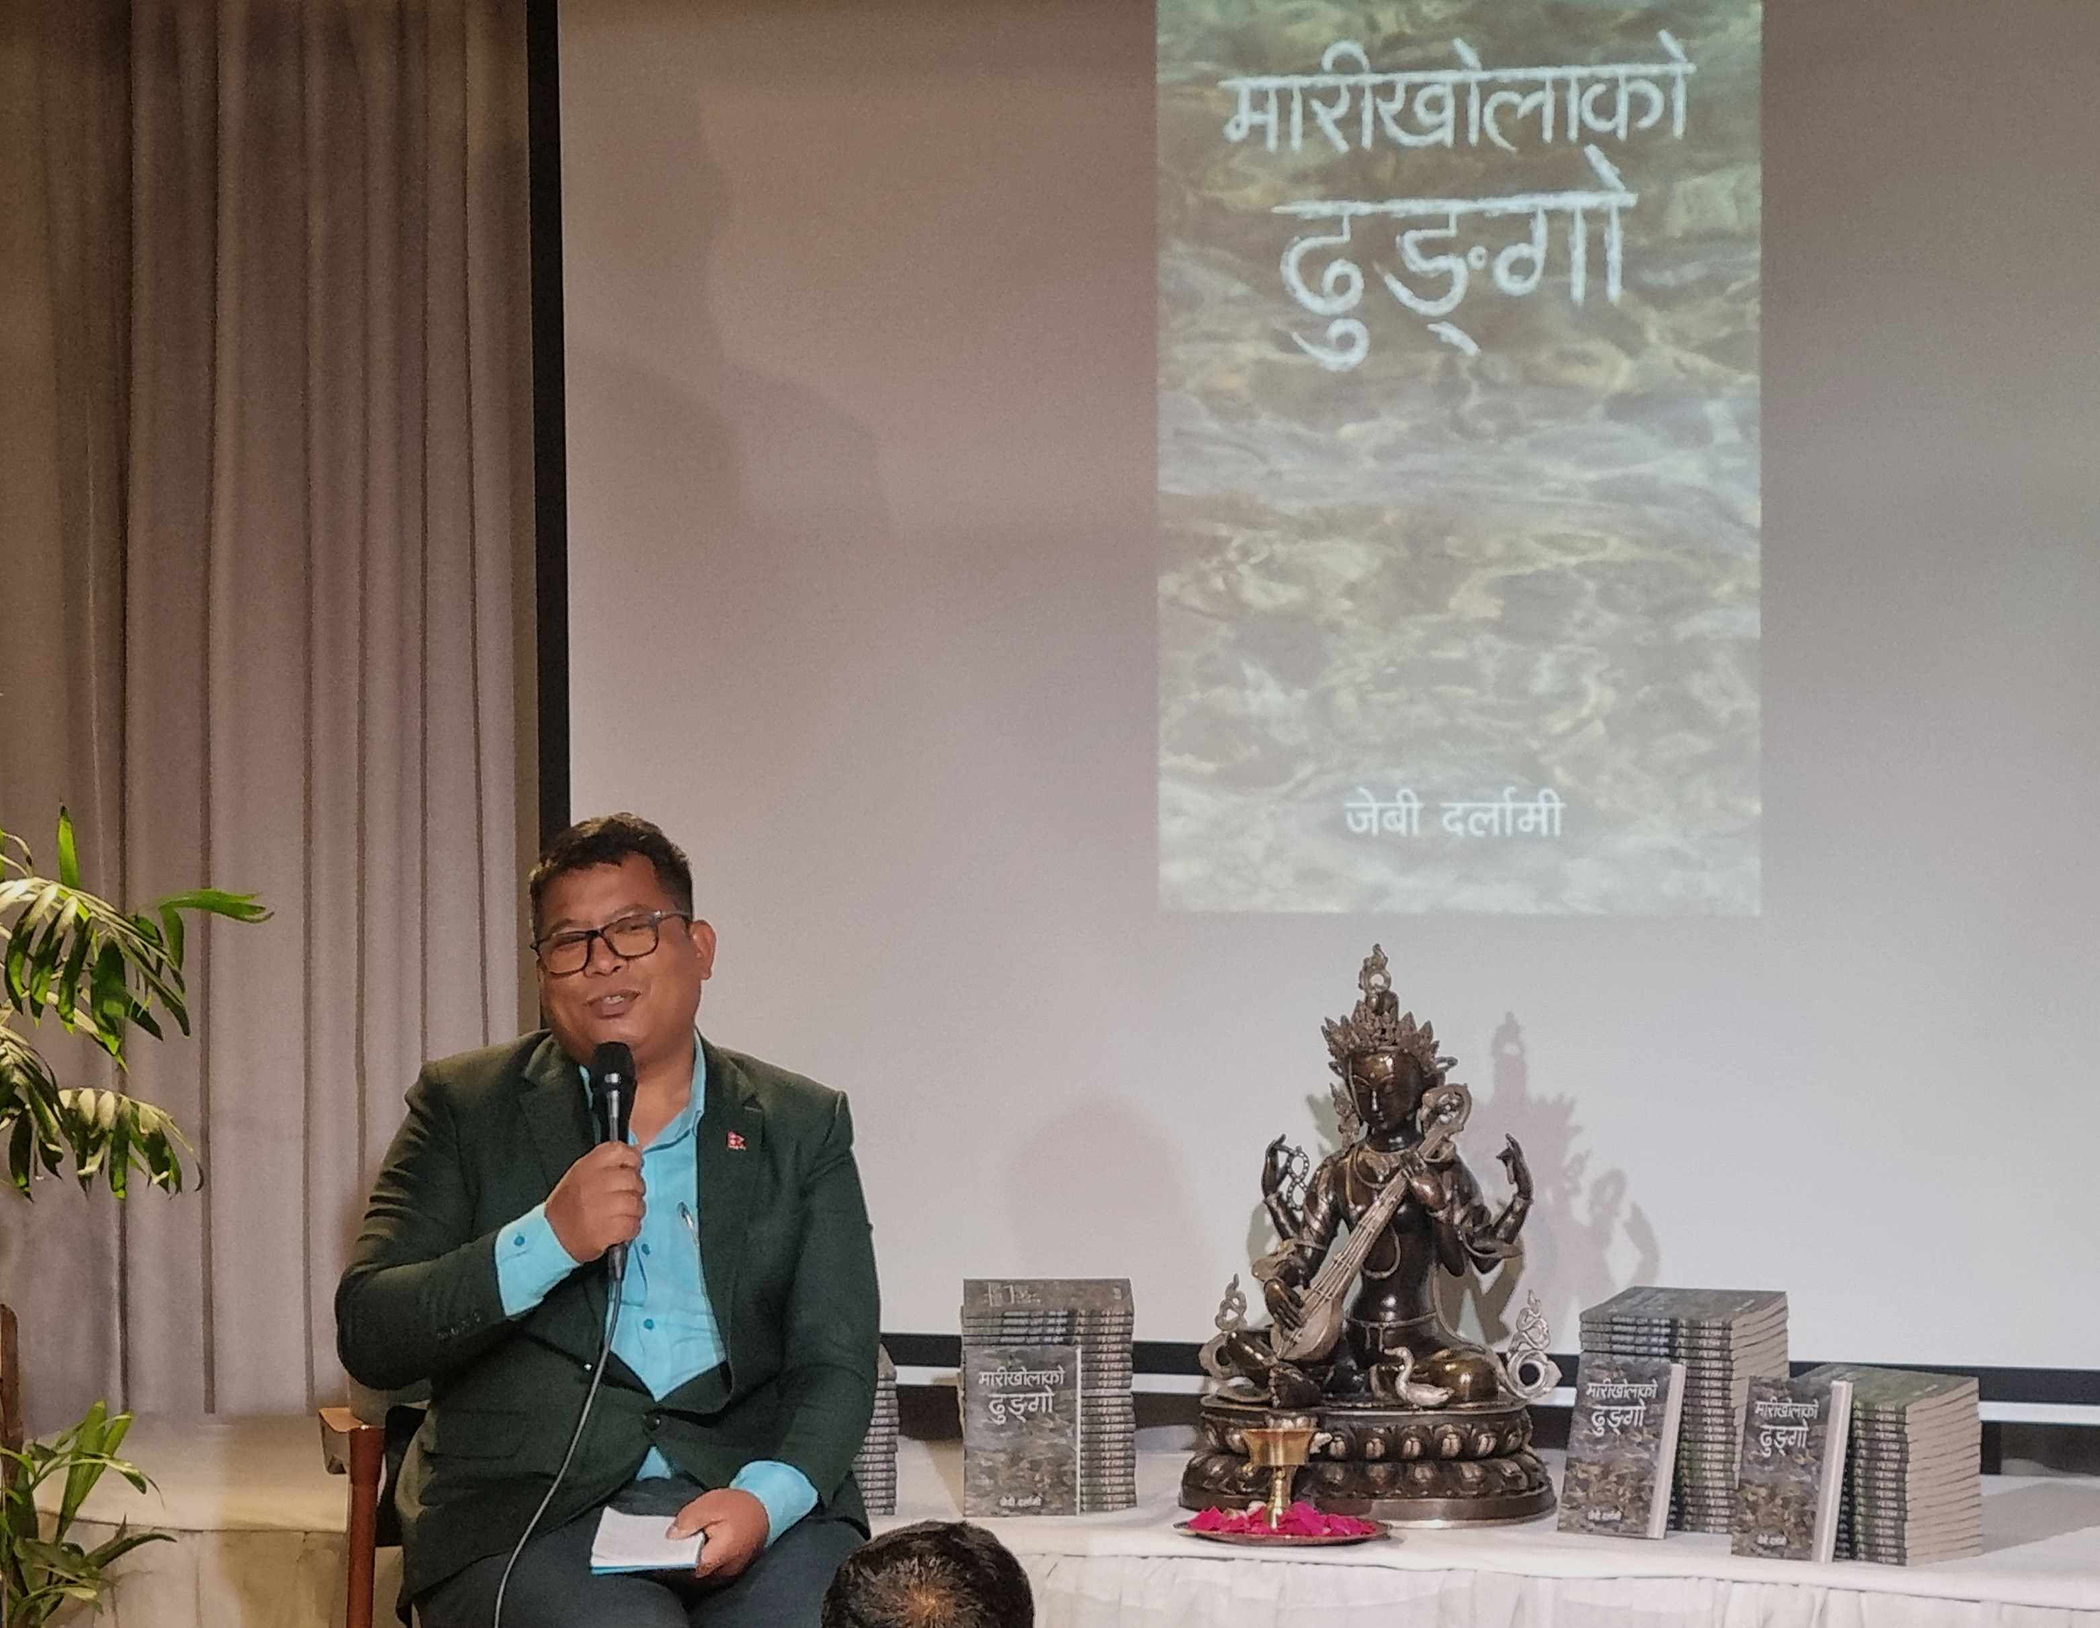 02-Author-JB-Darlami-speaking-at-the-launch-of-his-new-book-Marikhola-Ko-Dhungo-1712391410.jpg